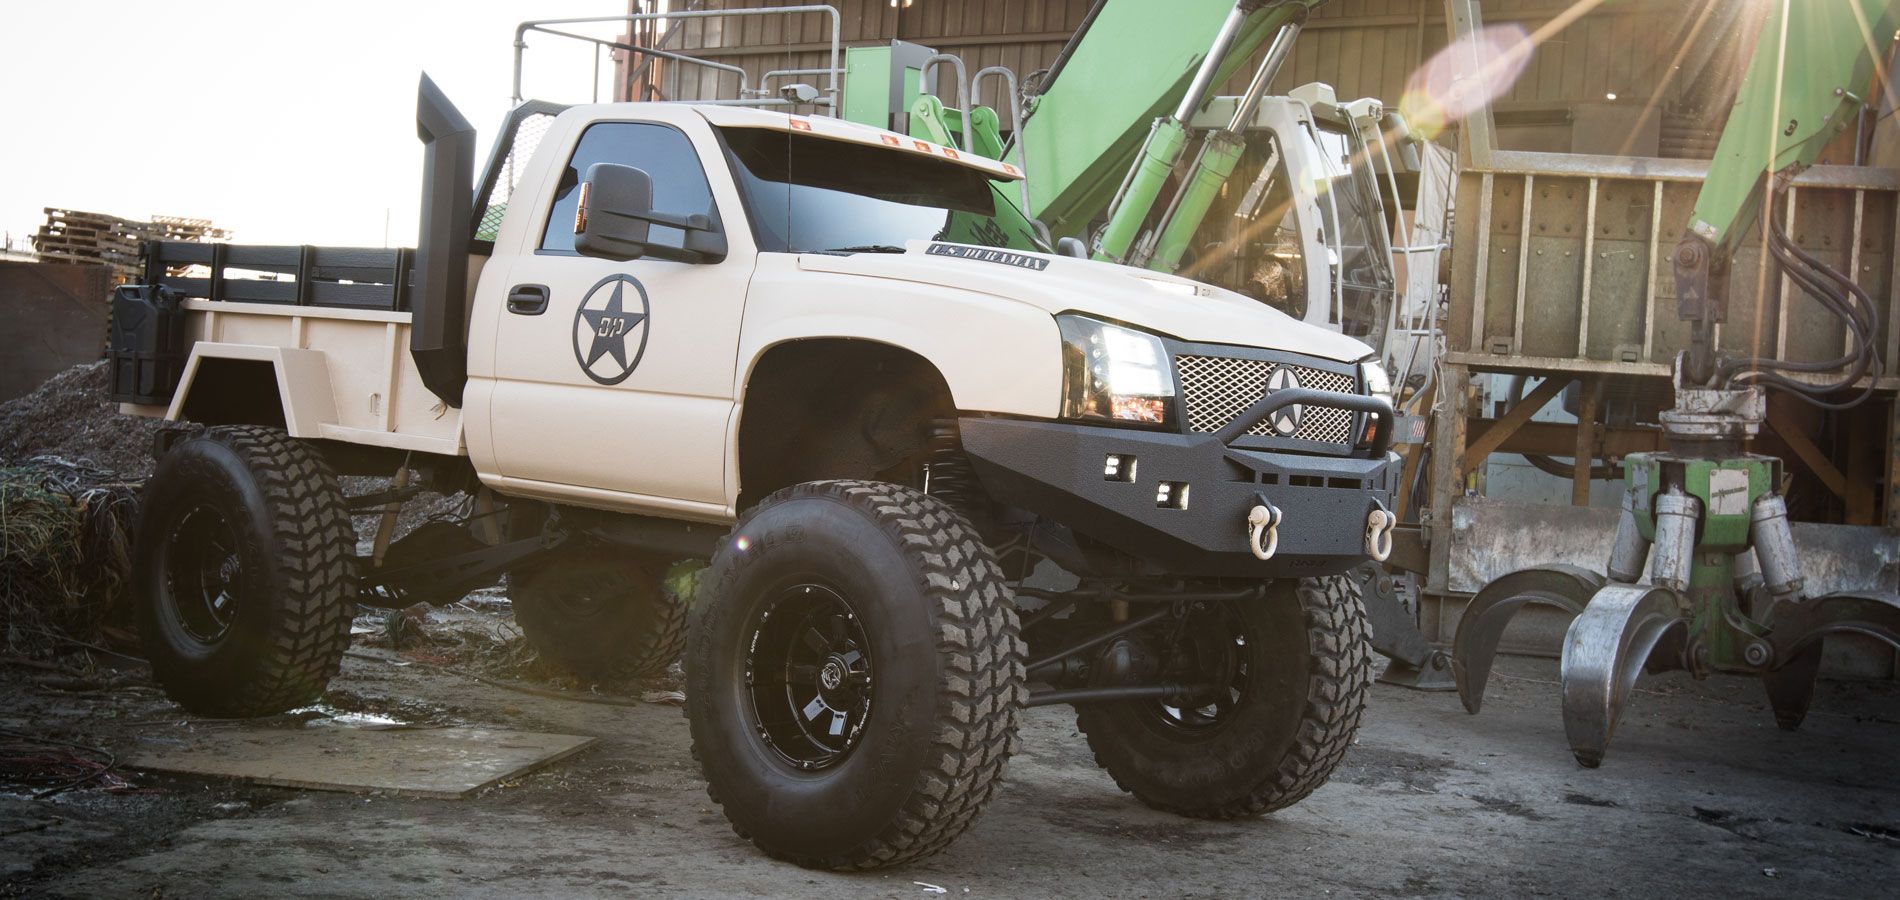 2004 Chevy Silverado customized by the Diesel Brothers